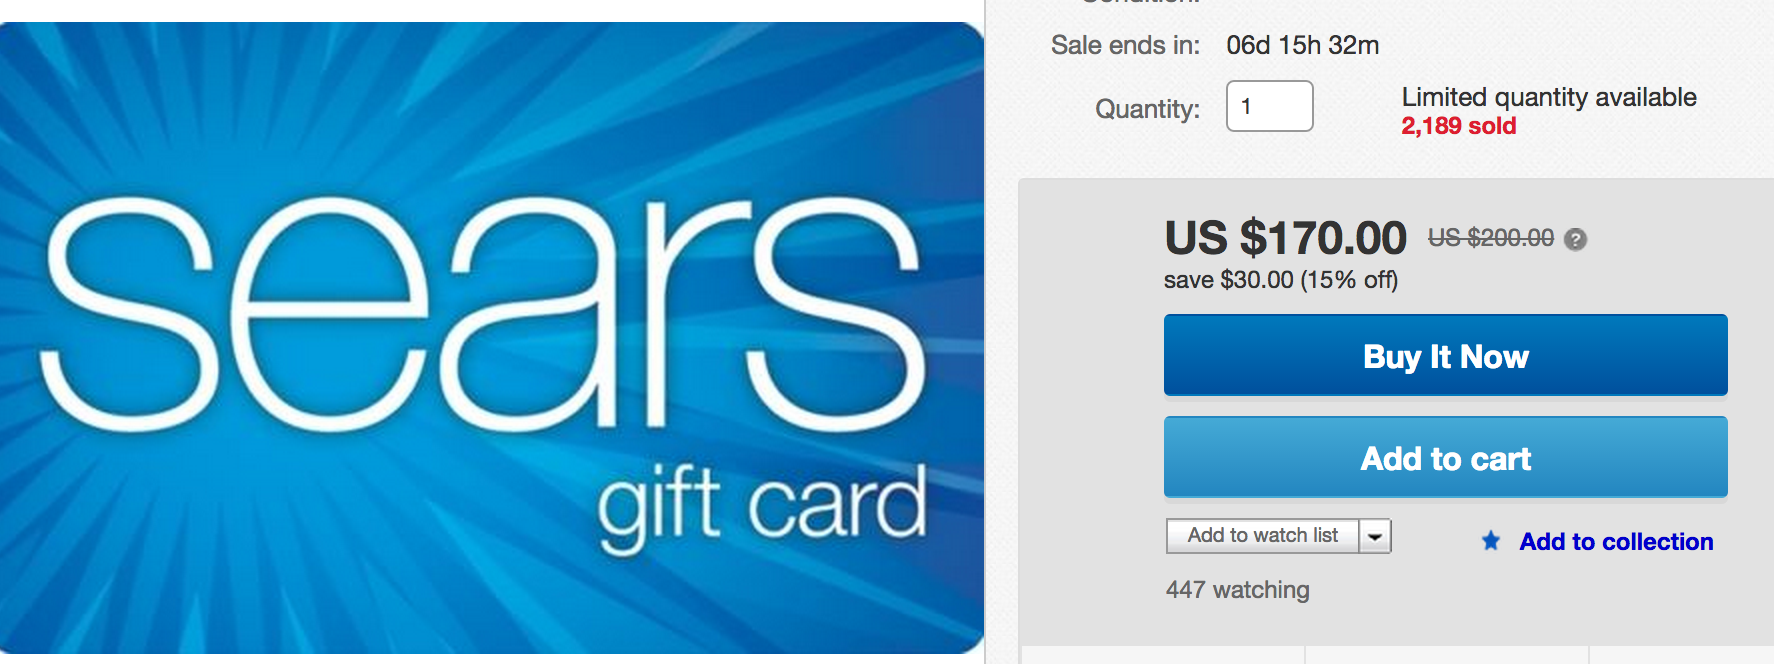 Get Sears 200 Gift Card For 170 Better Than Last Week Running